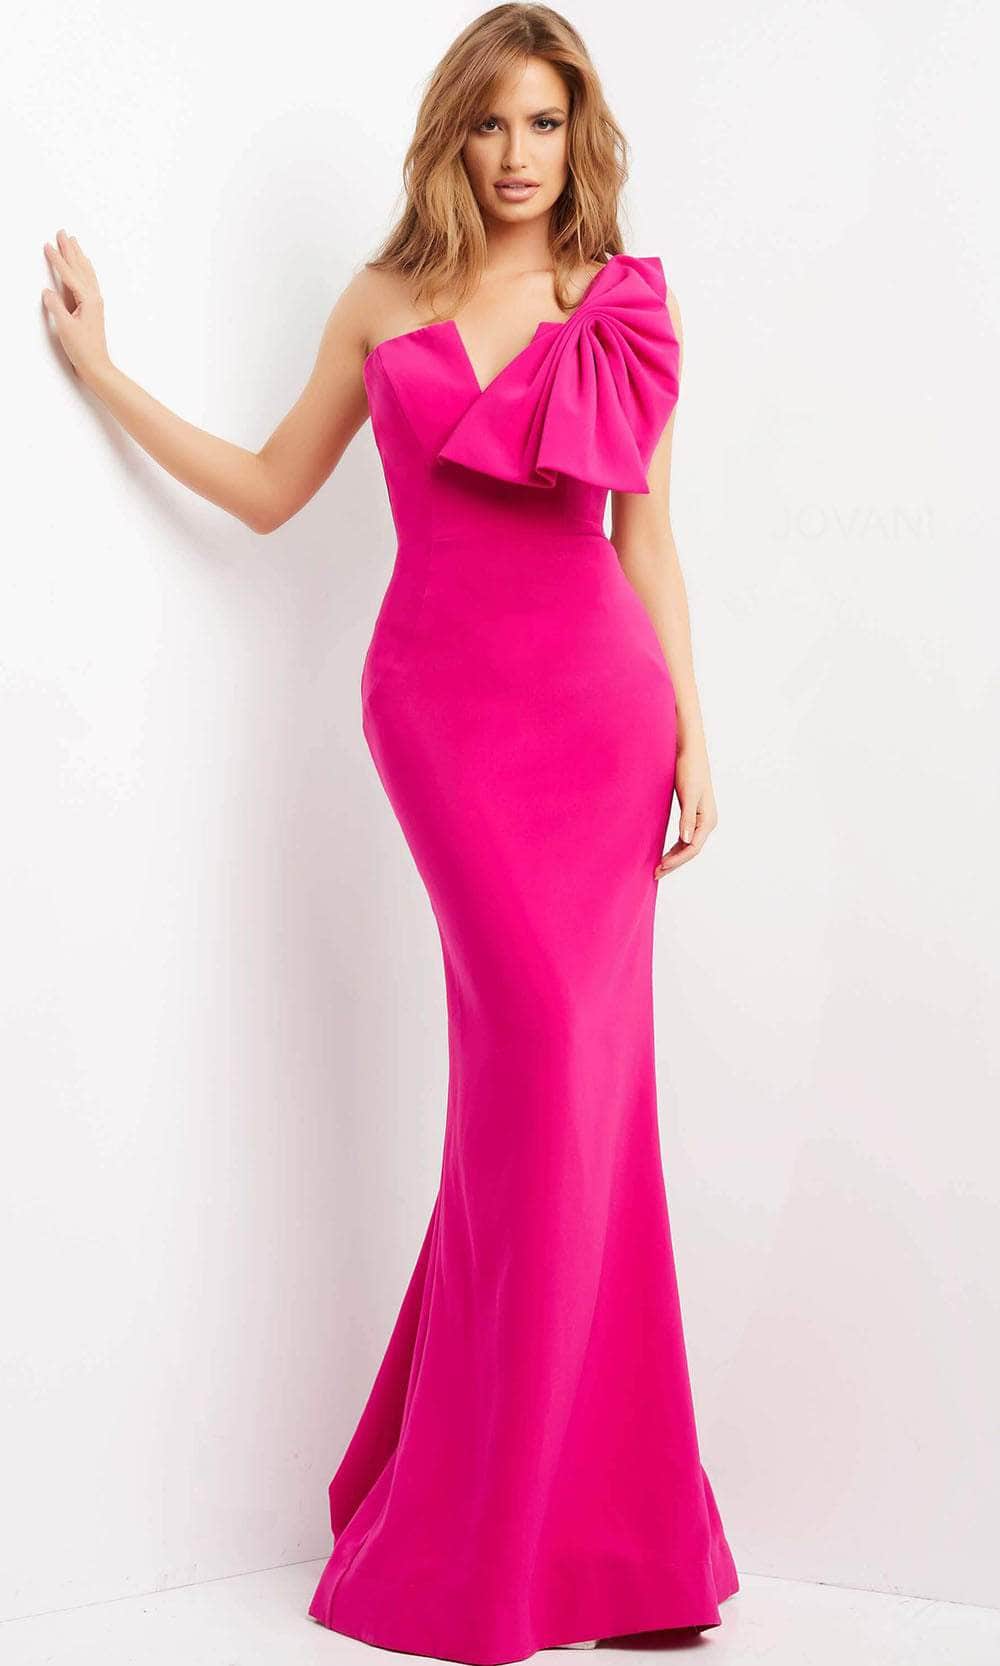 Image of Jovani 07306 - Bow Accented Mermaid Evening Dress